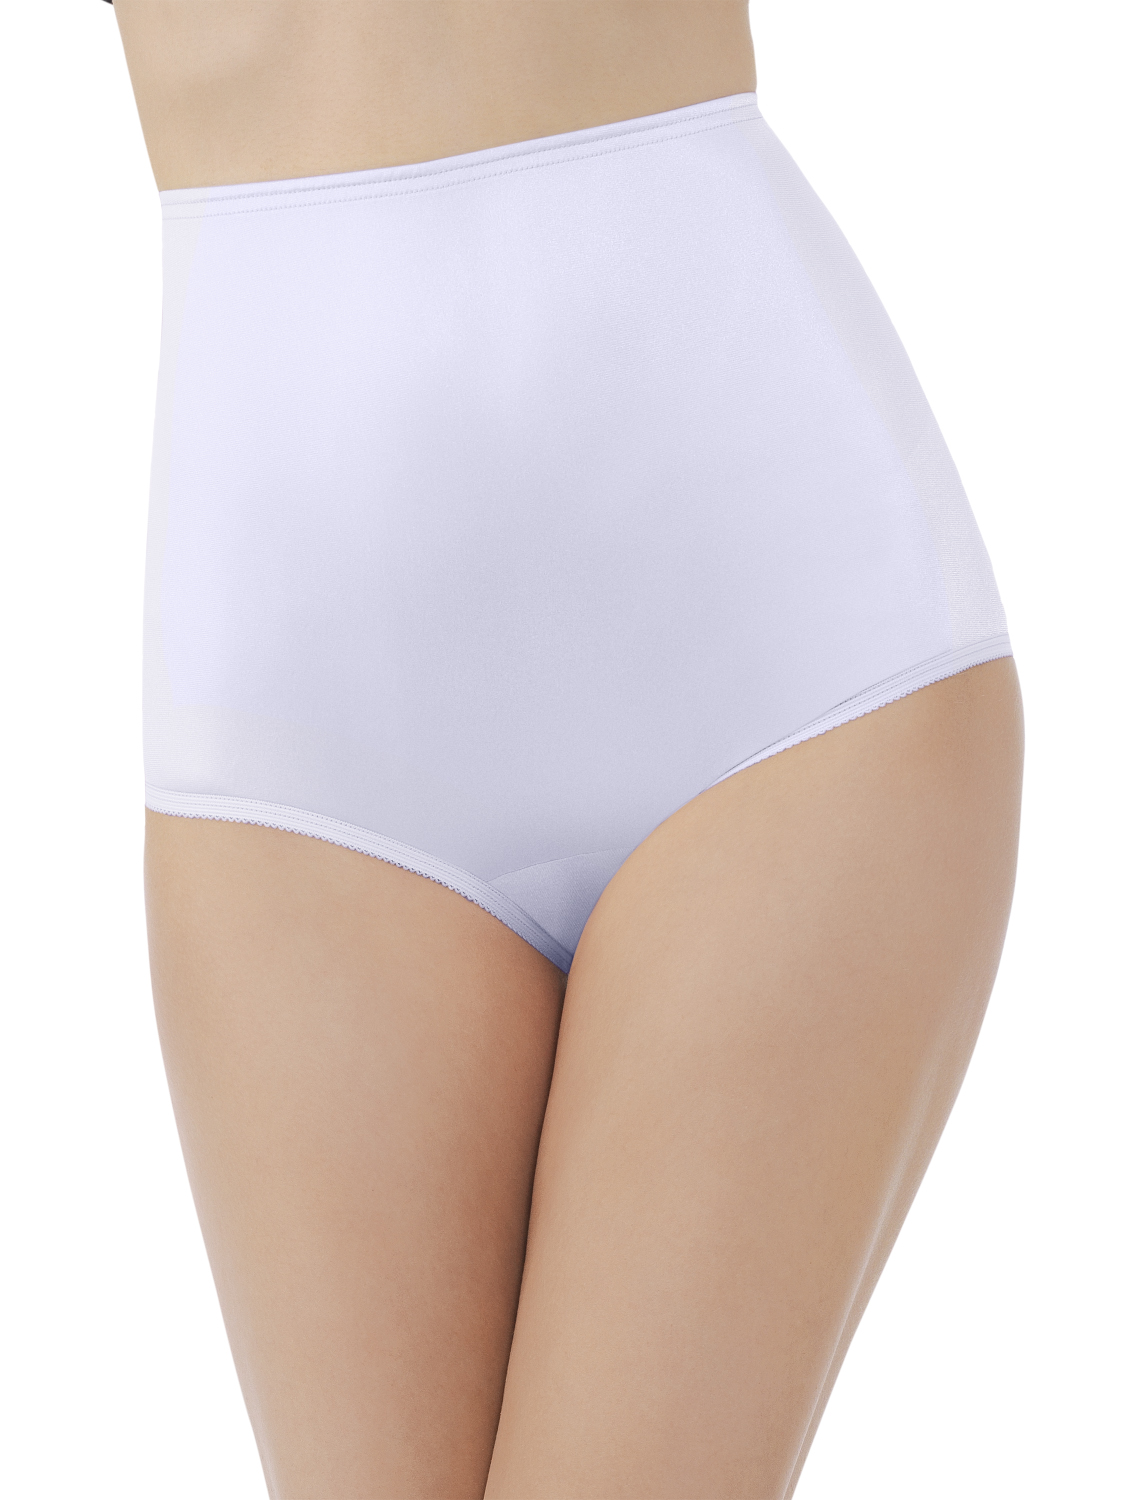 Vanity Fair Women's Perfectly Yours Ravissant Tailored Brief